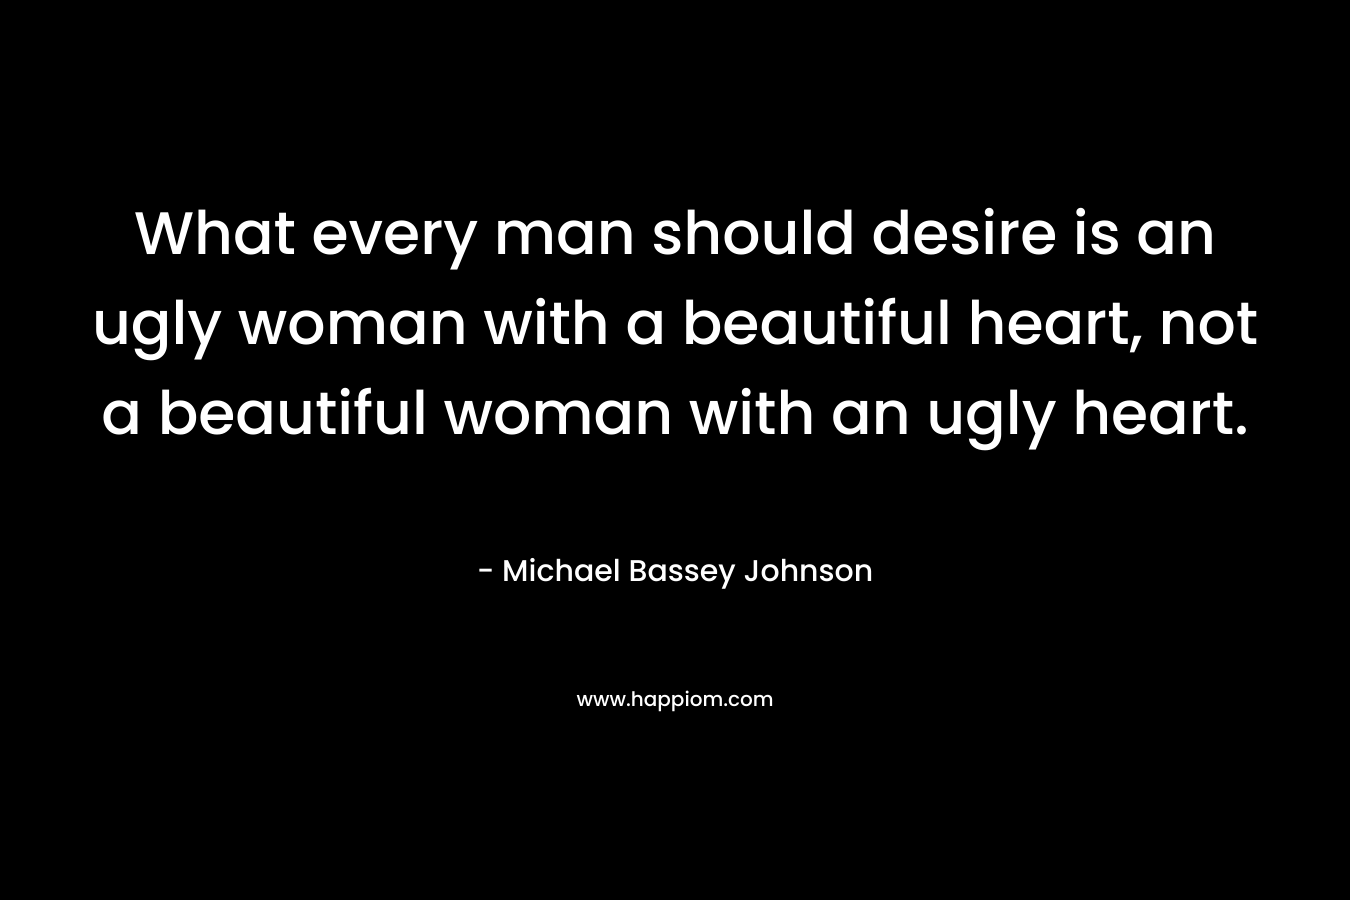 What every man should desire is an ugly woman with a beautiful heart, not a beautiful woman with an ugly heart.